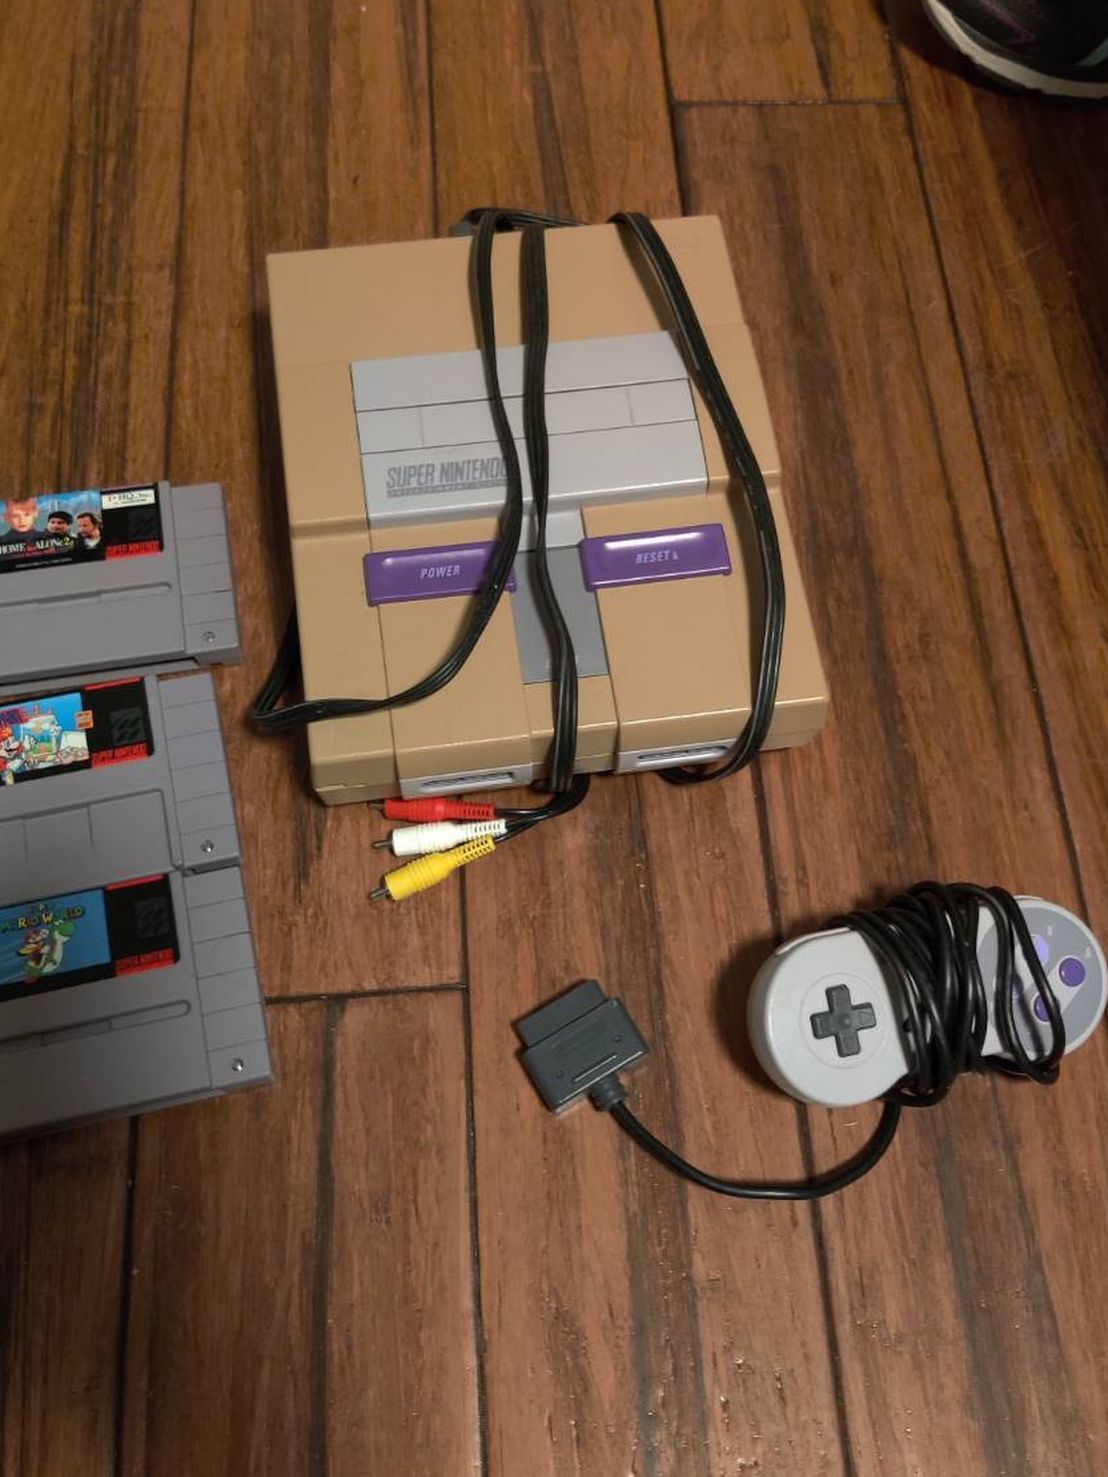 Super Nintendo With games